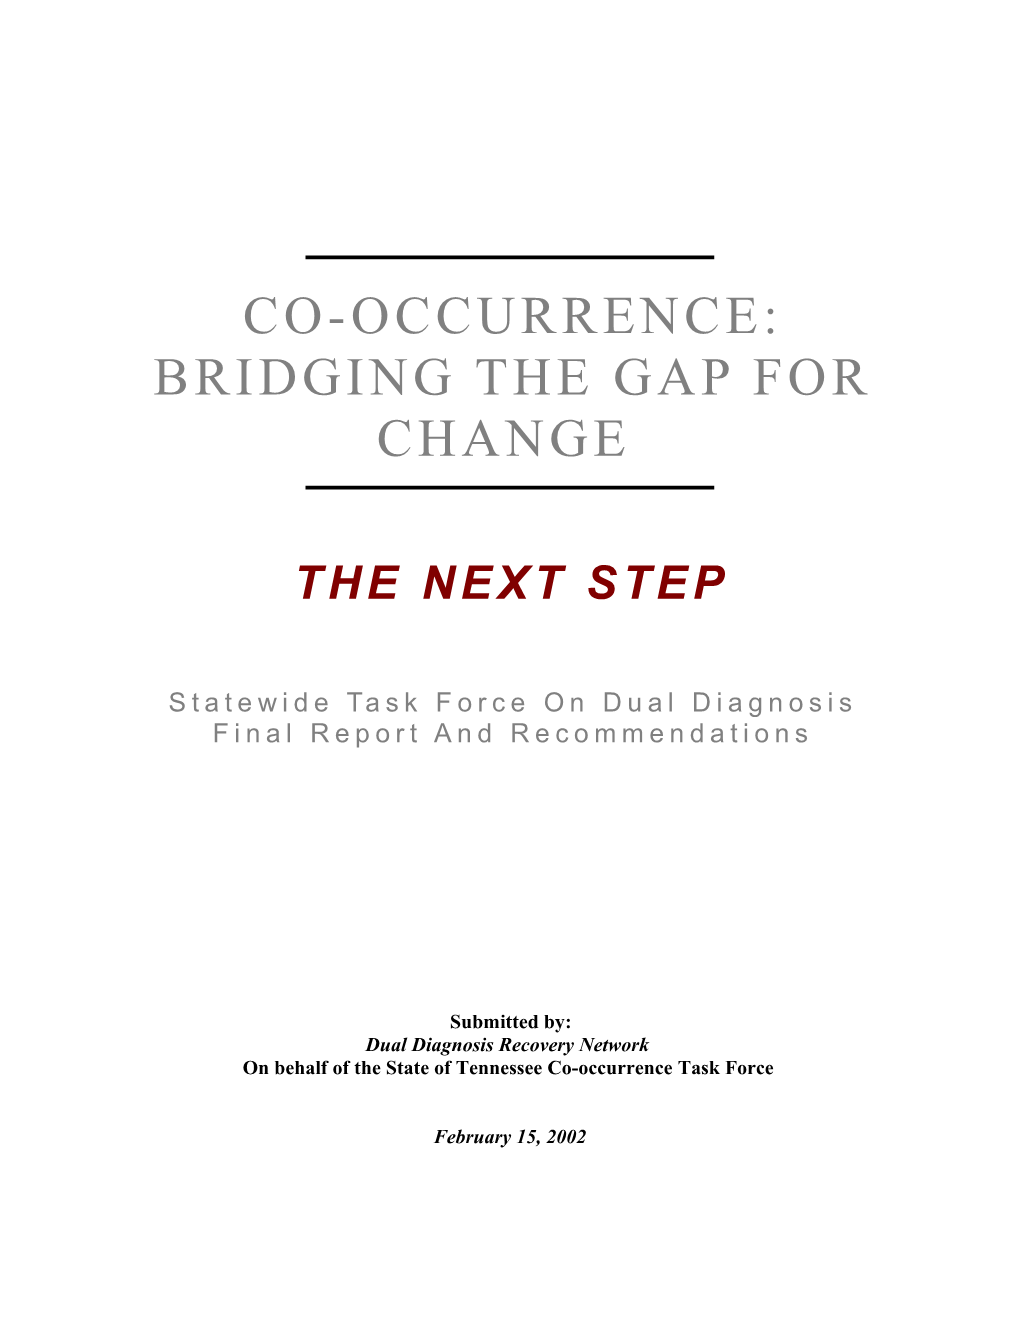 Co-Occurrence: Bridging the Gap for Change